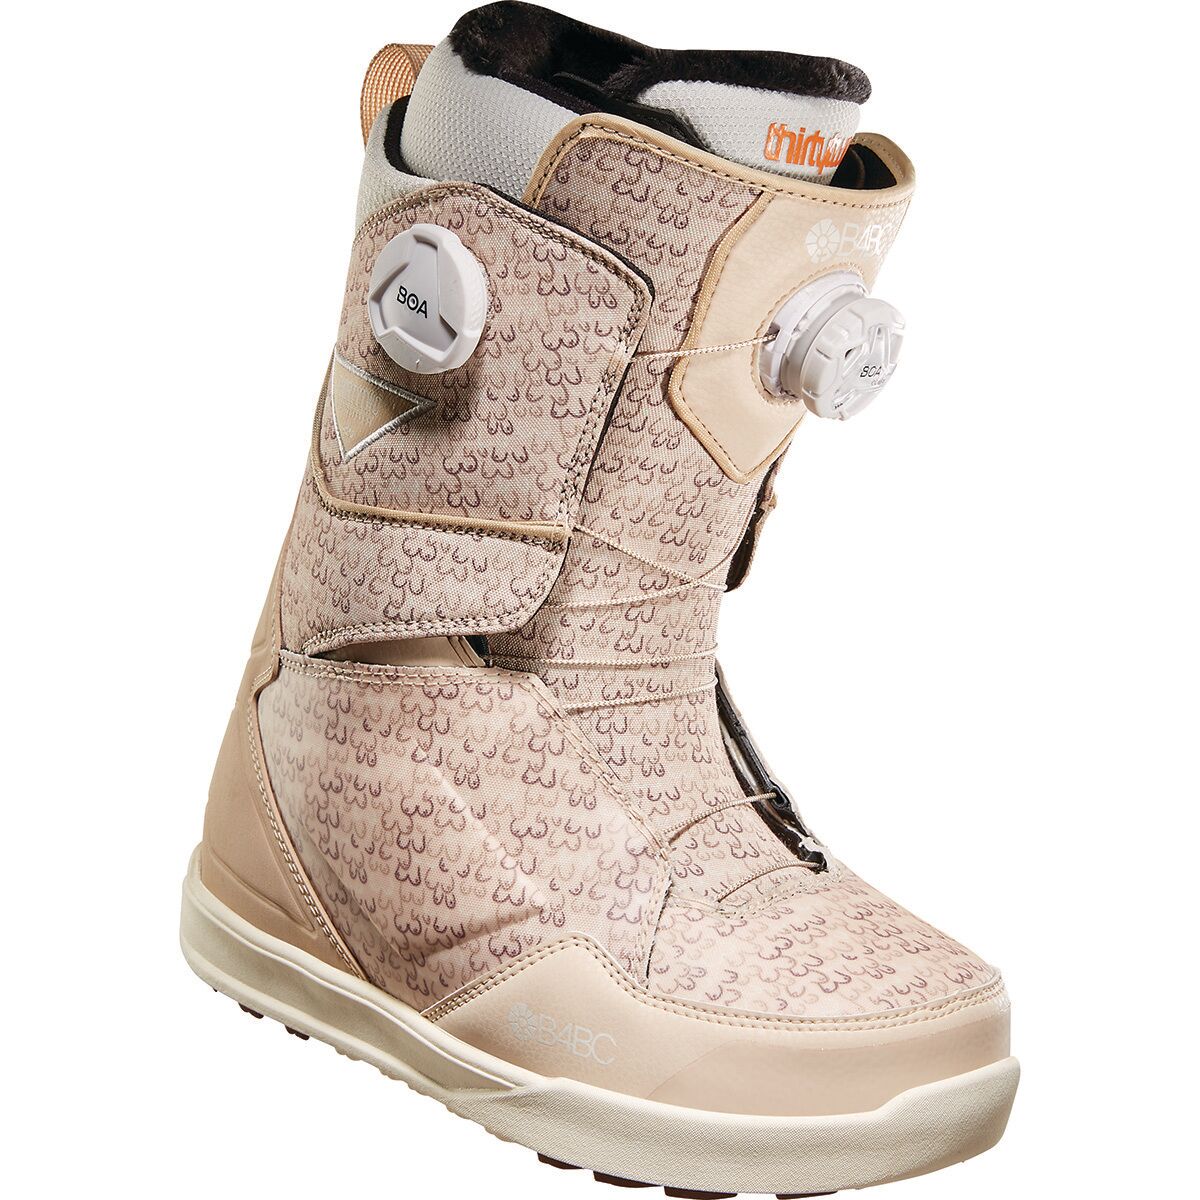 ThirtyTwo Lashed Double BOA B4BC Snowboard Boot - 2023 - Women's